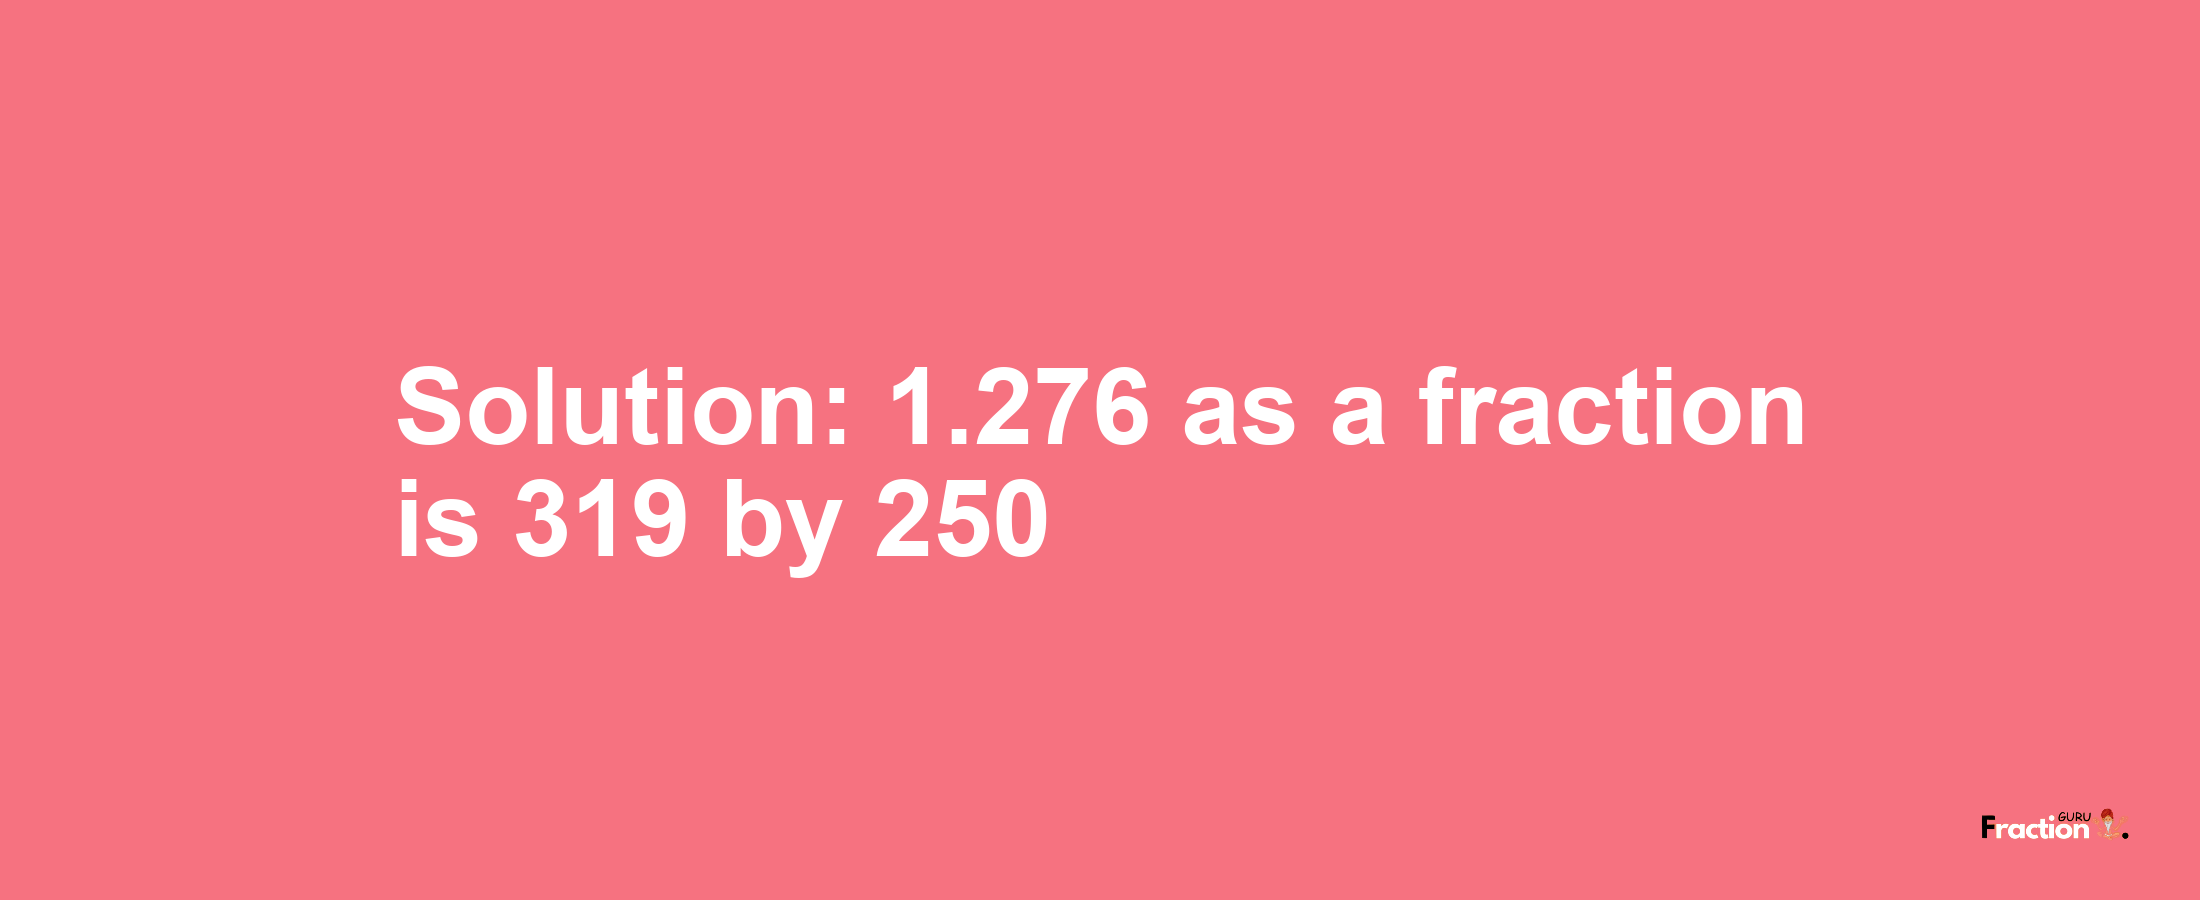 Solution:1.276 as a fraction is 319/250